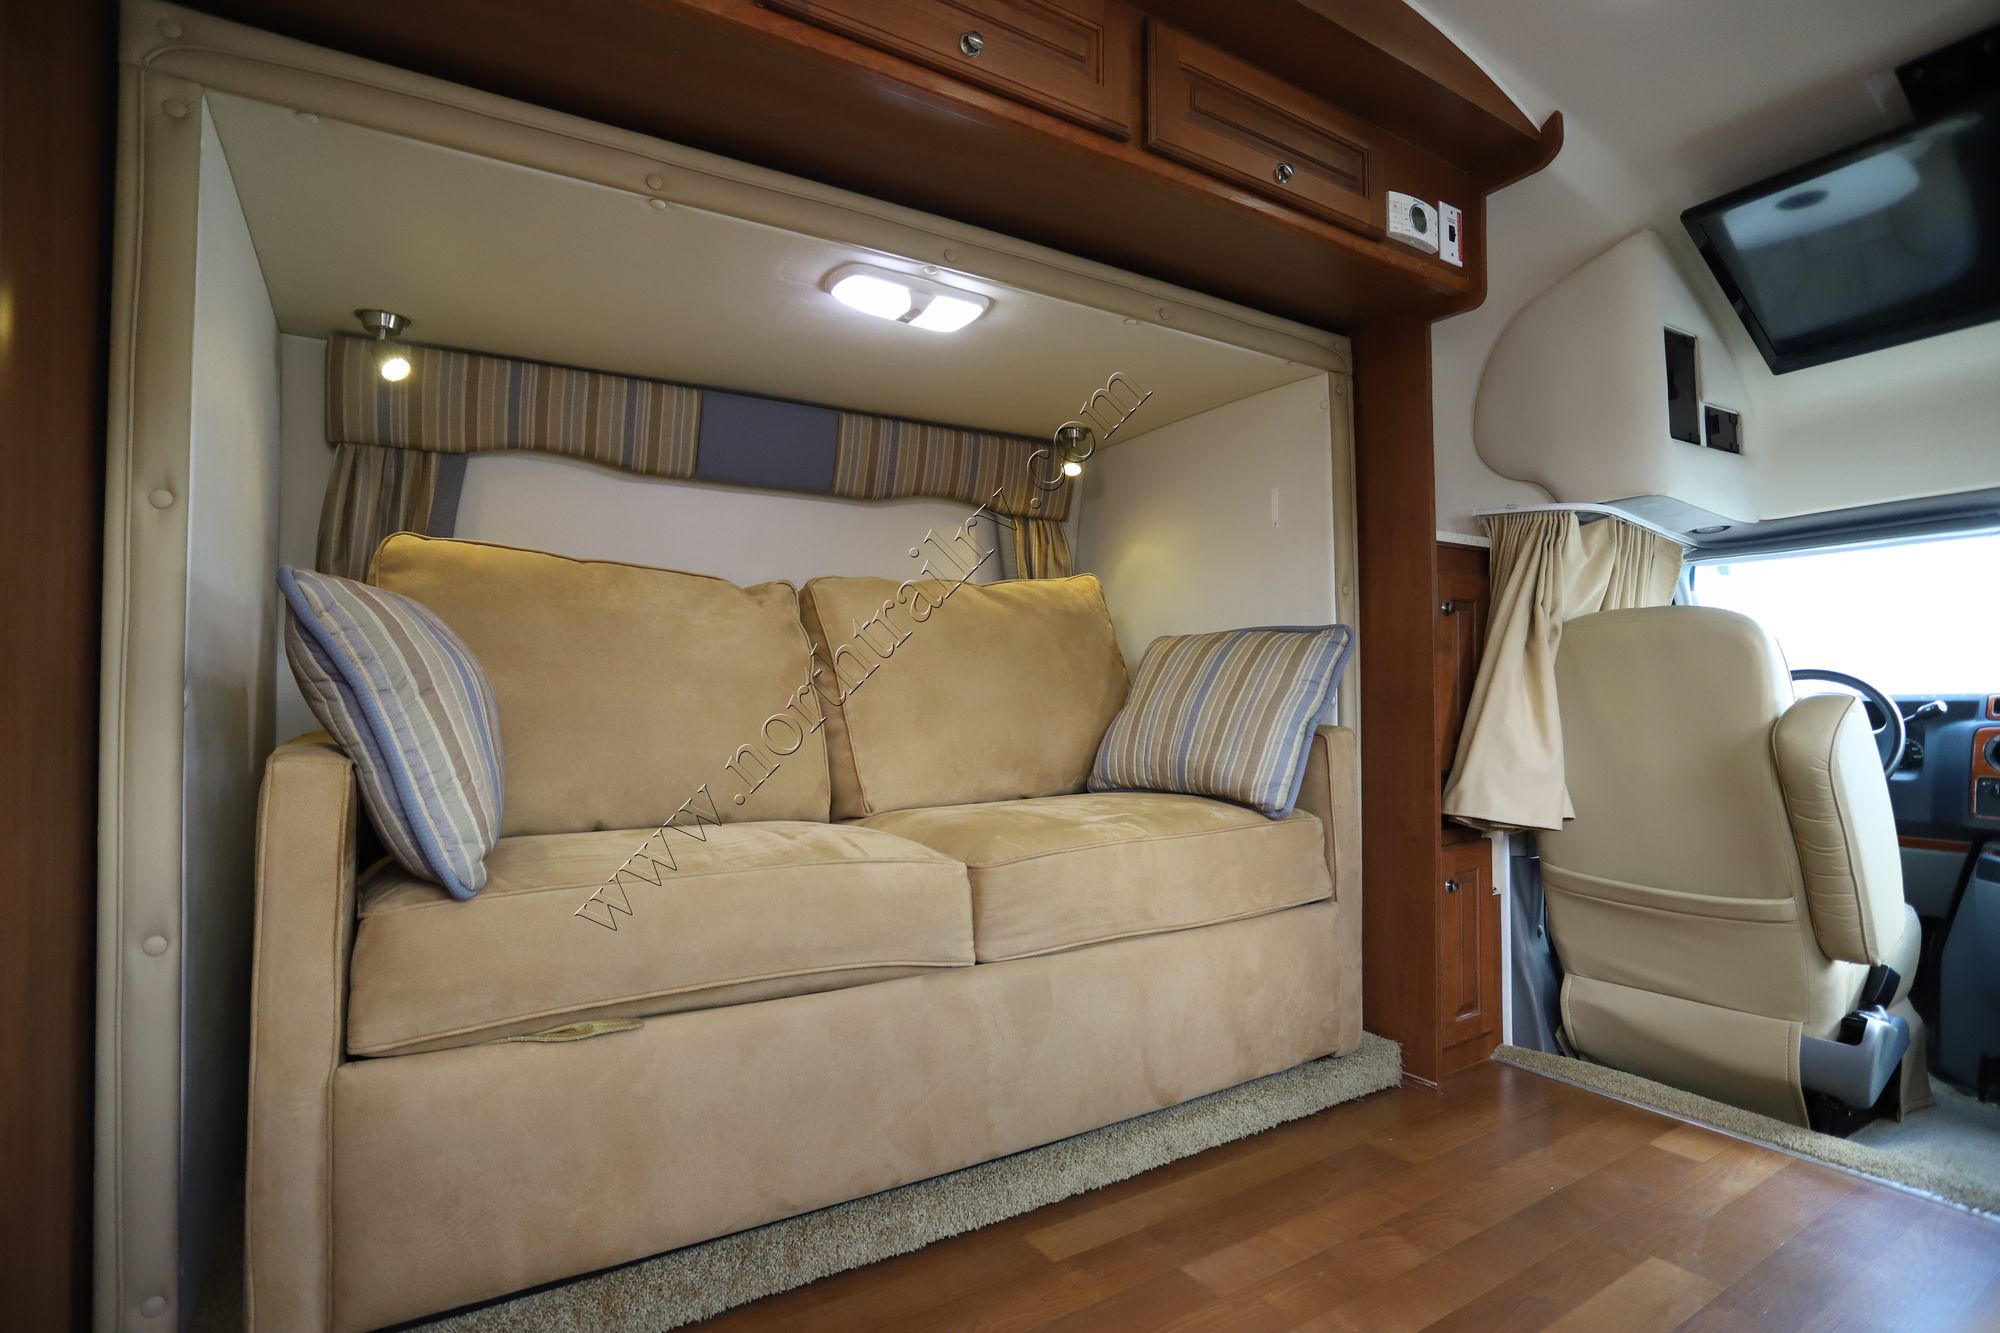 Used 2013 Coach House Platinum 261XL Class C  For Sale